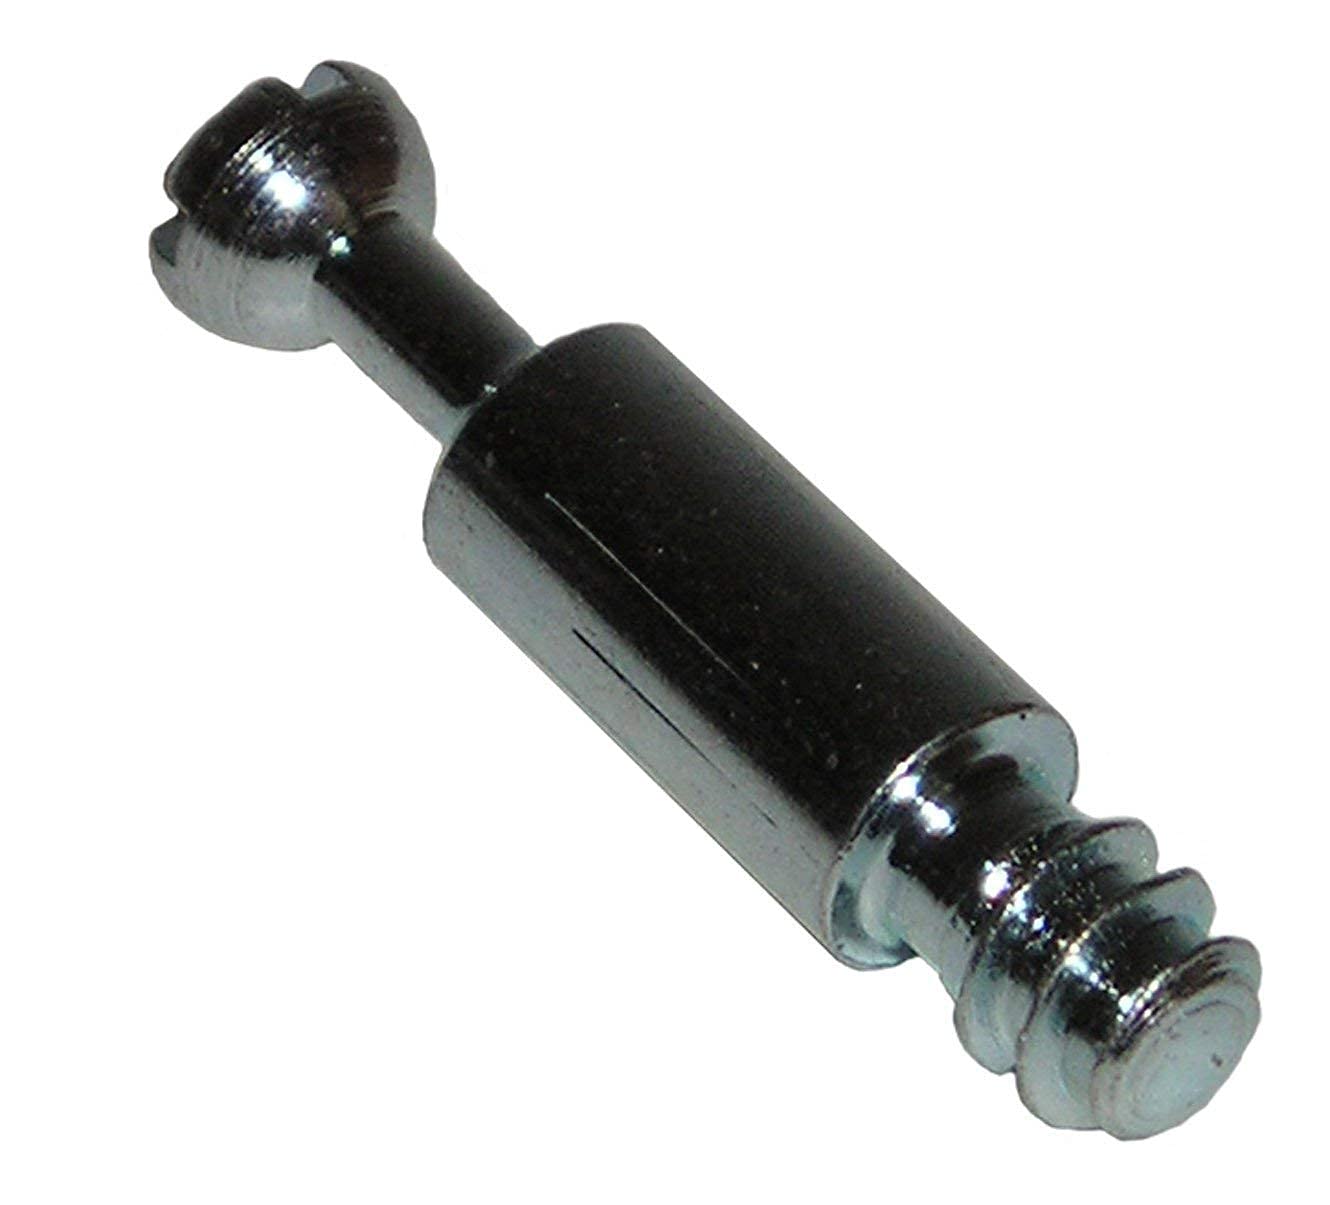 24.5mm (32mm Overall) Dowel Pin Bolt for Cam Lock Disc Furniture Connectors for 5mm Hole